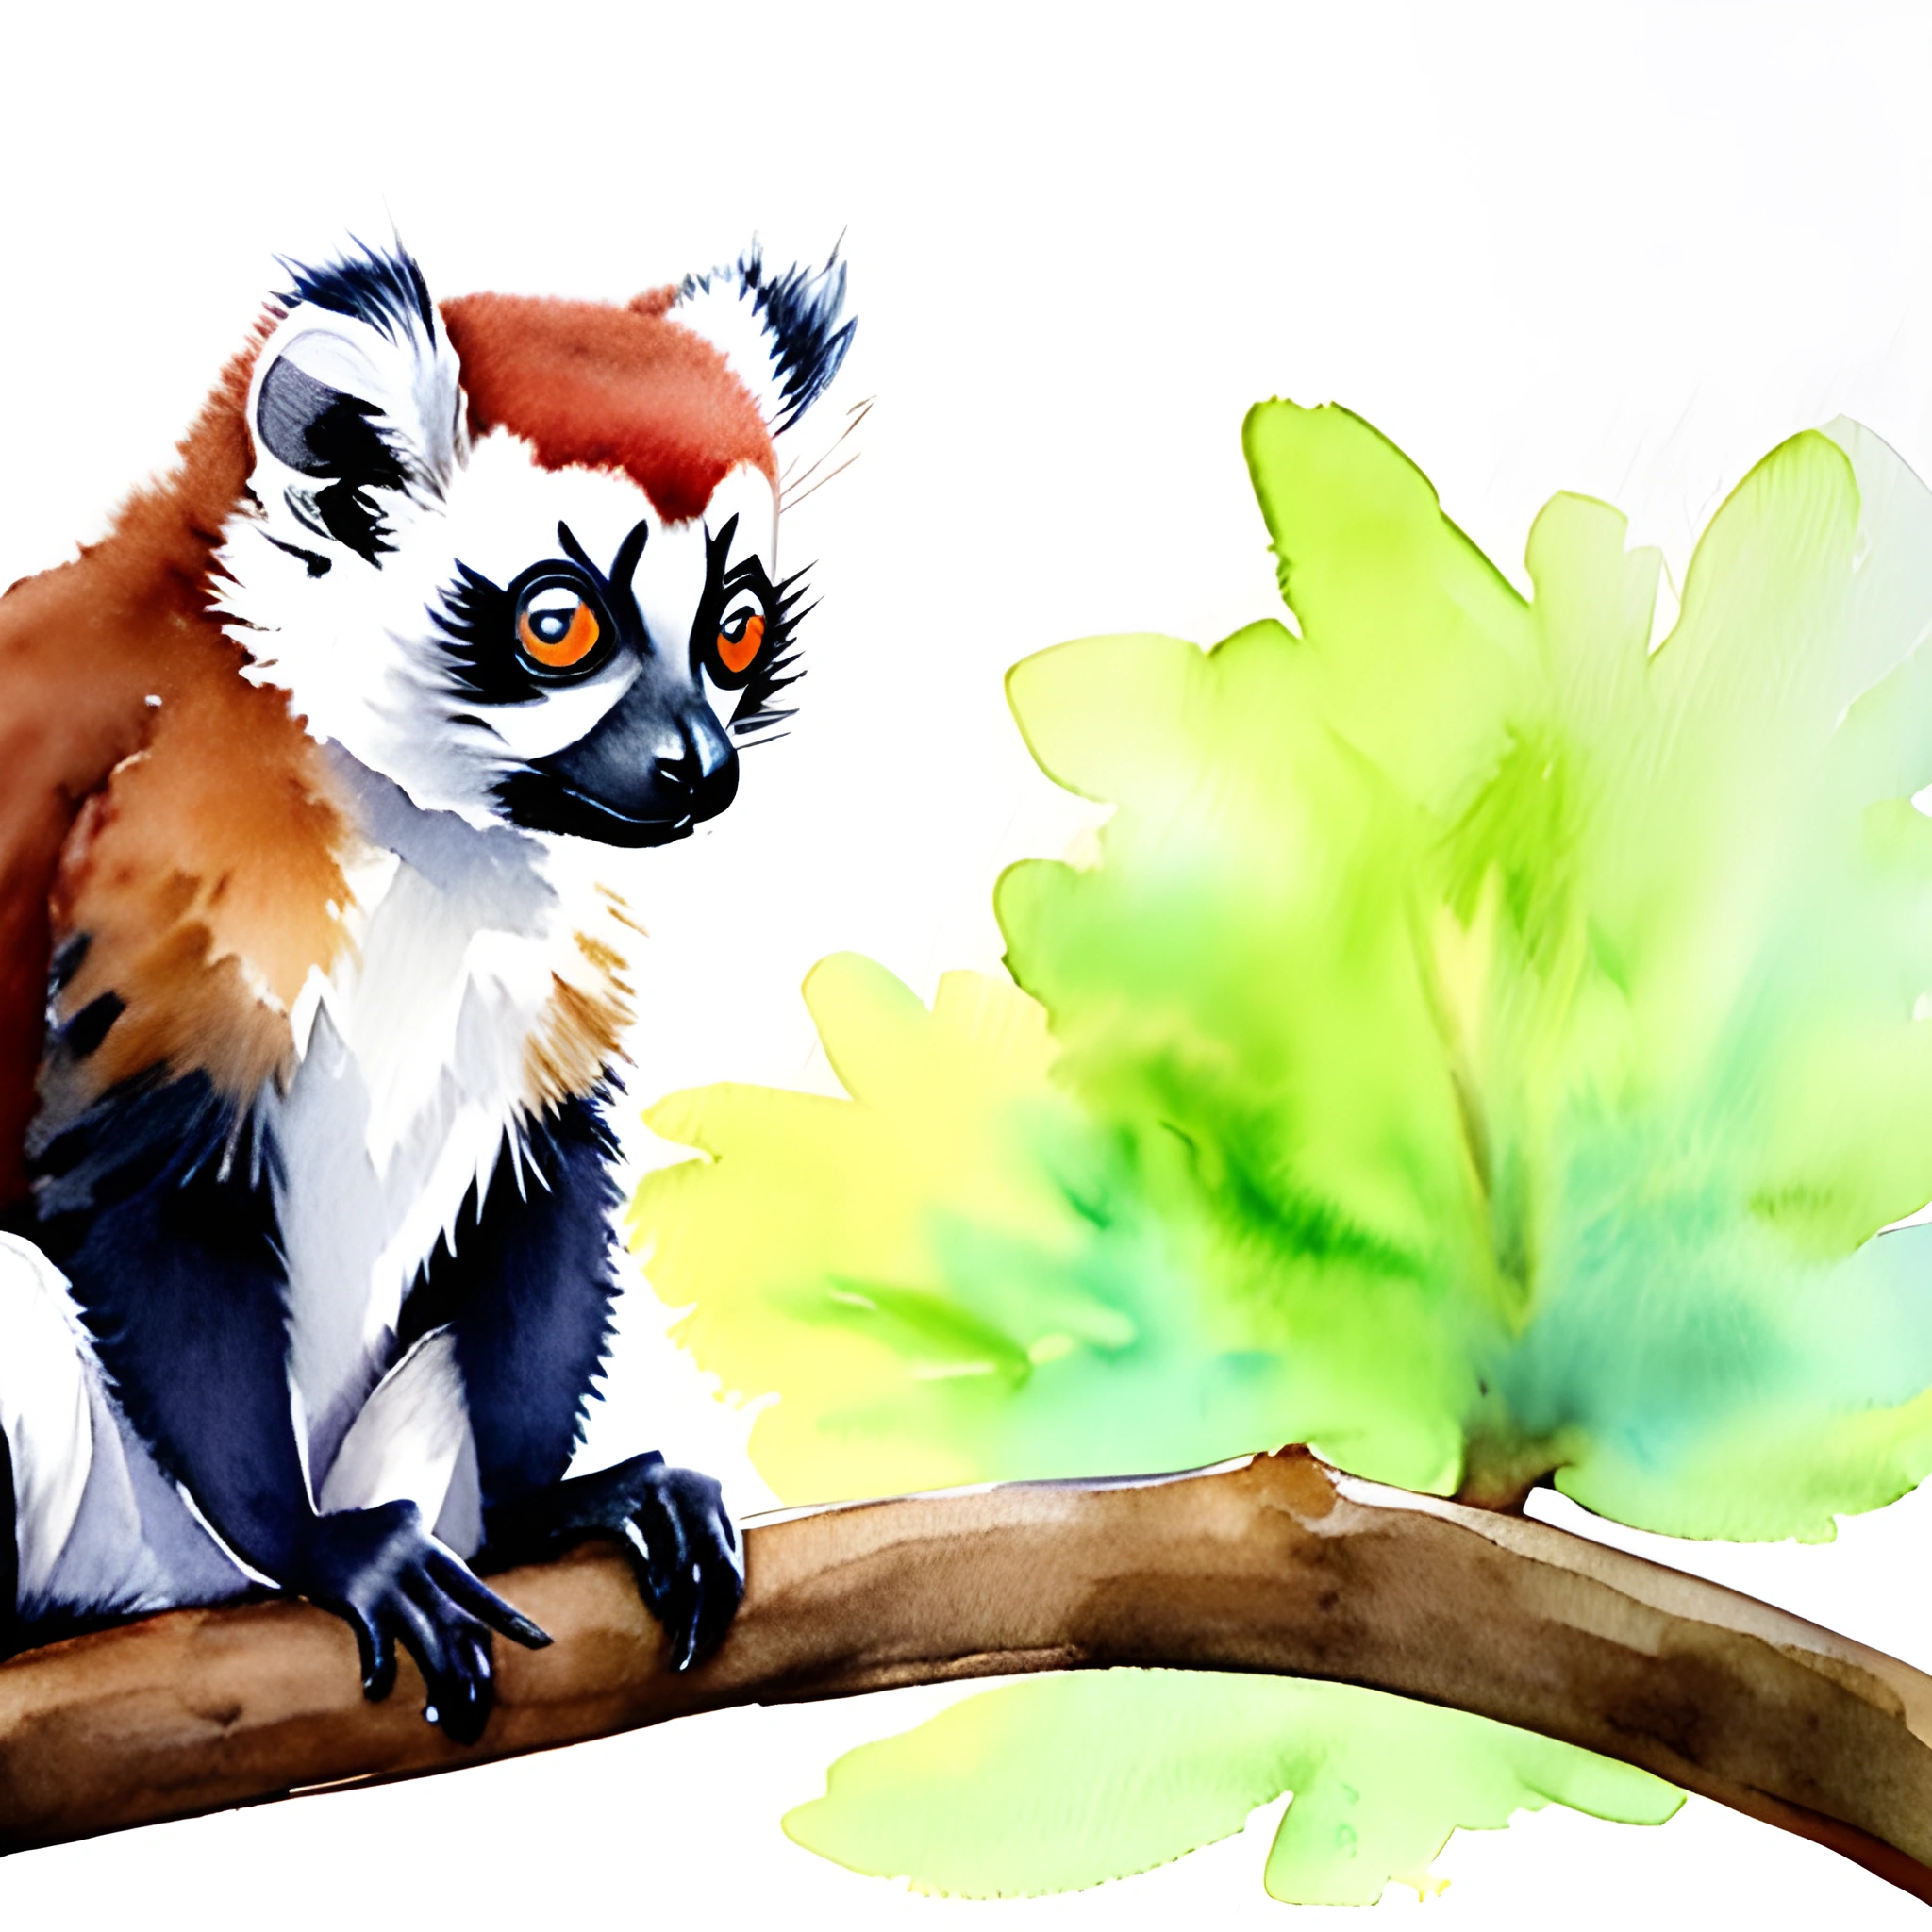 painting of a lemur sitting on a branch with a tree in the background